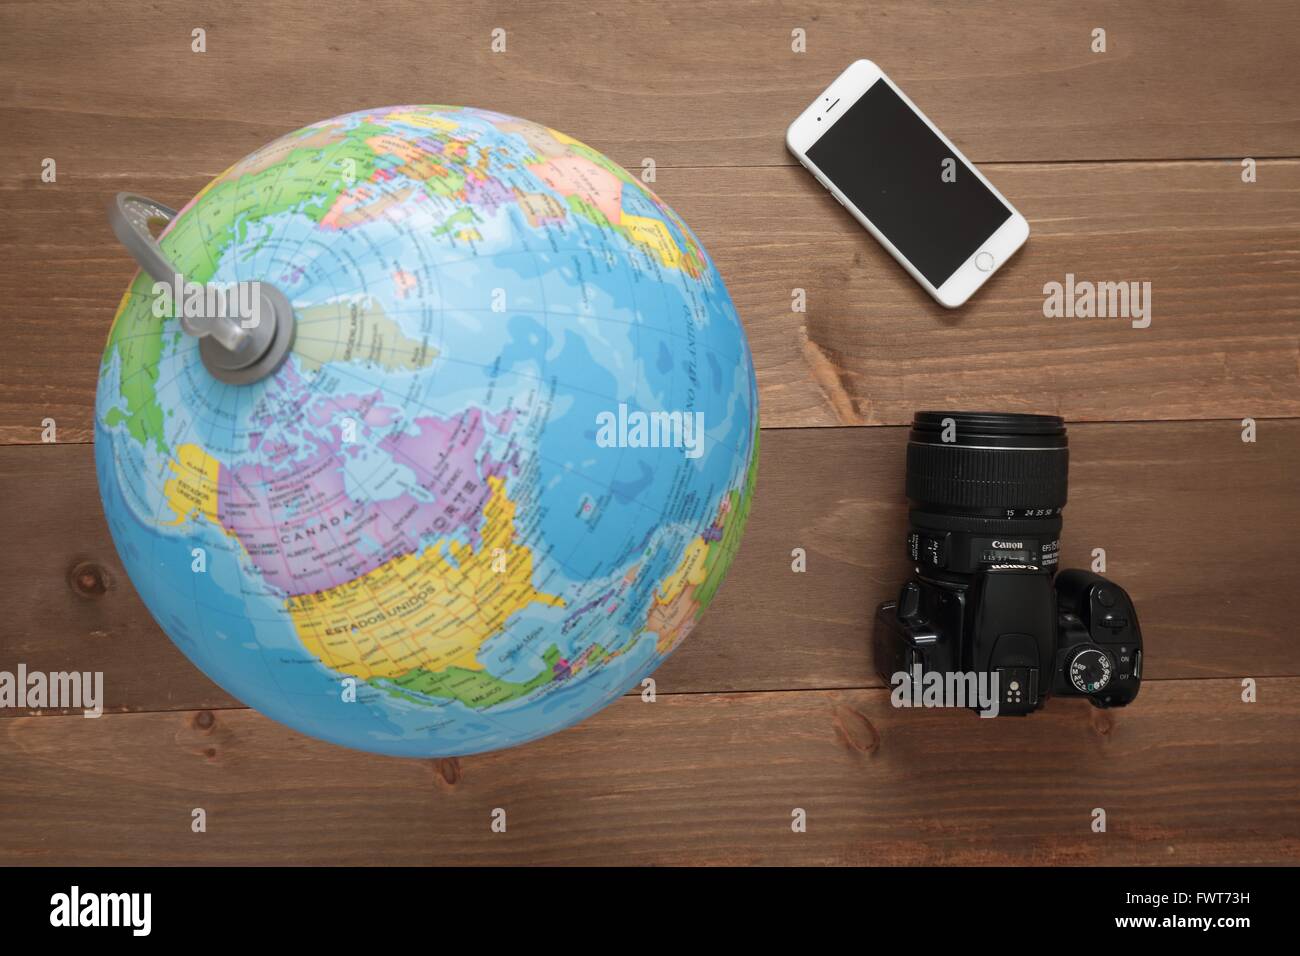 Elche, Spain. March 31, 2016: Globe, camera and mobile on wooden background Stock Photo